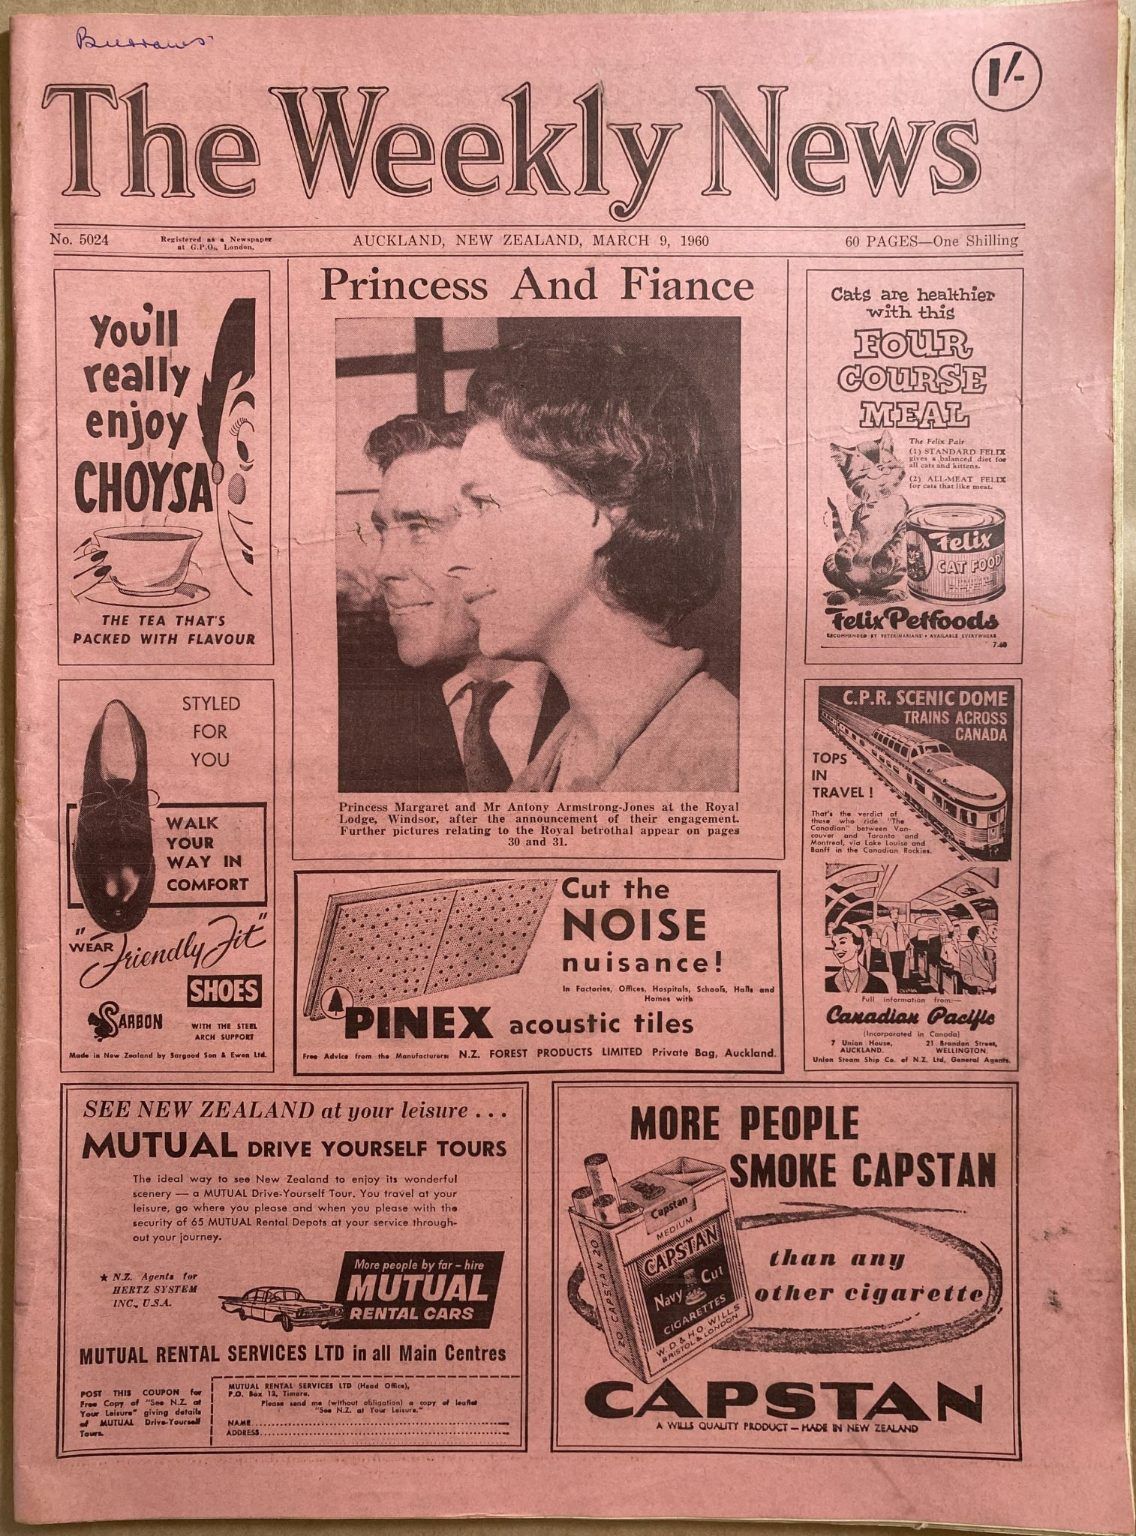 OLD NEWSPAPER: The Weekly News, No. 5024, 9 March 1960